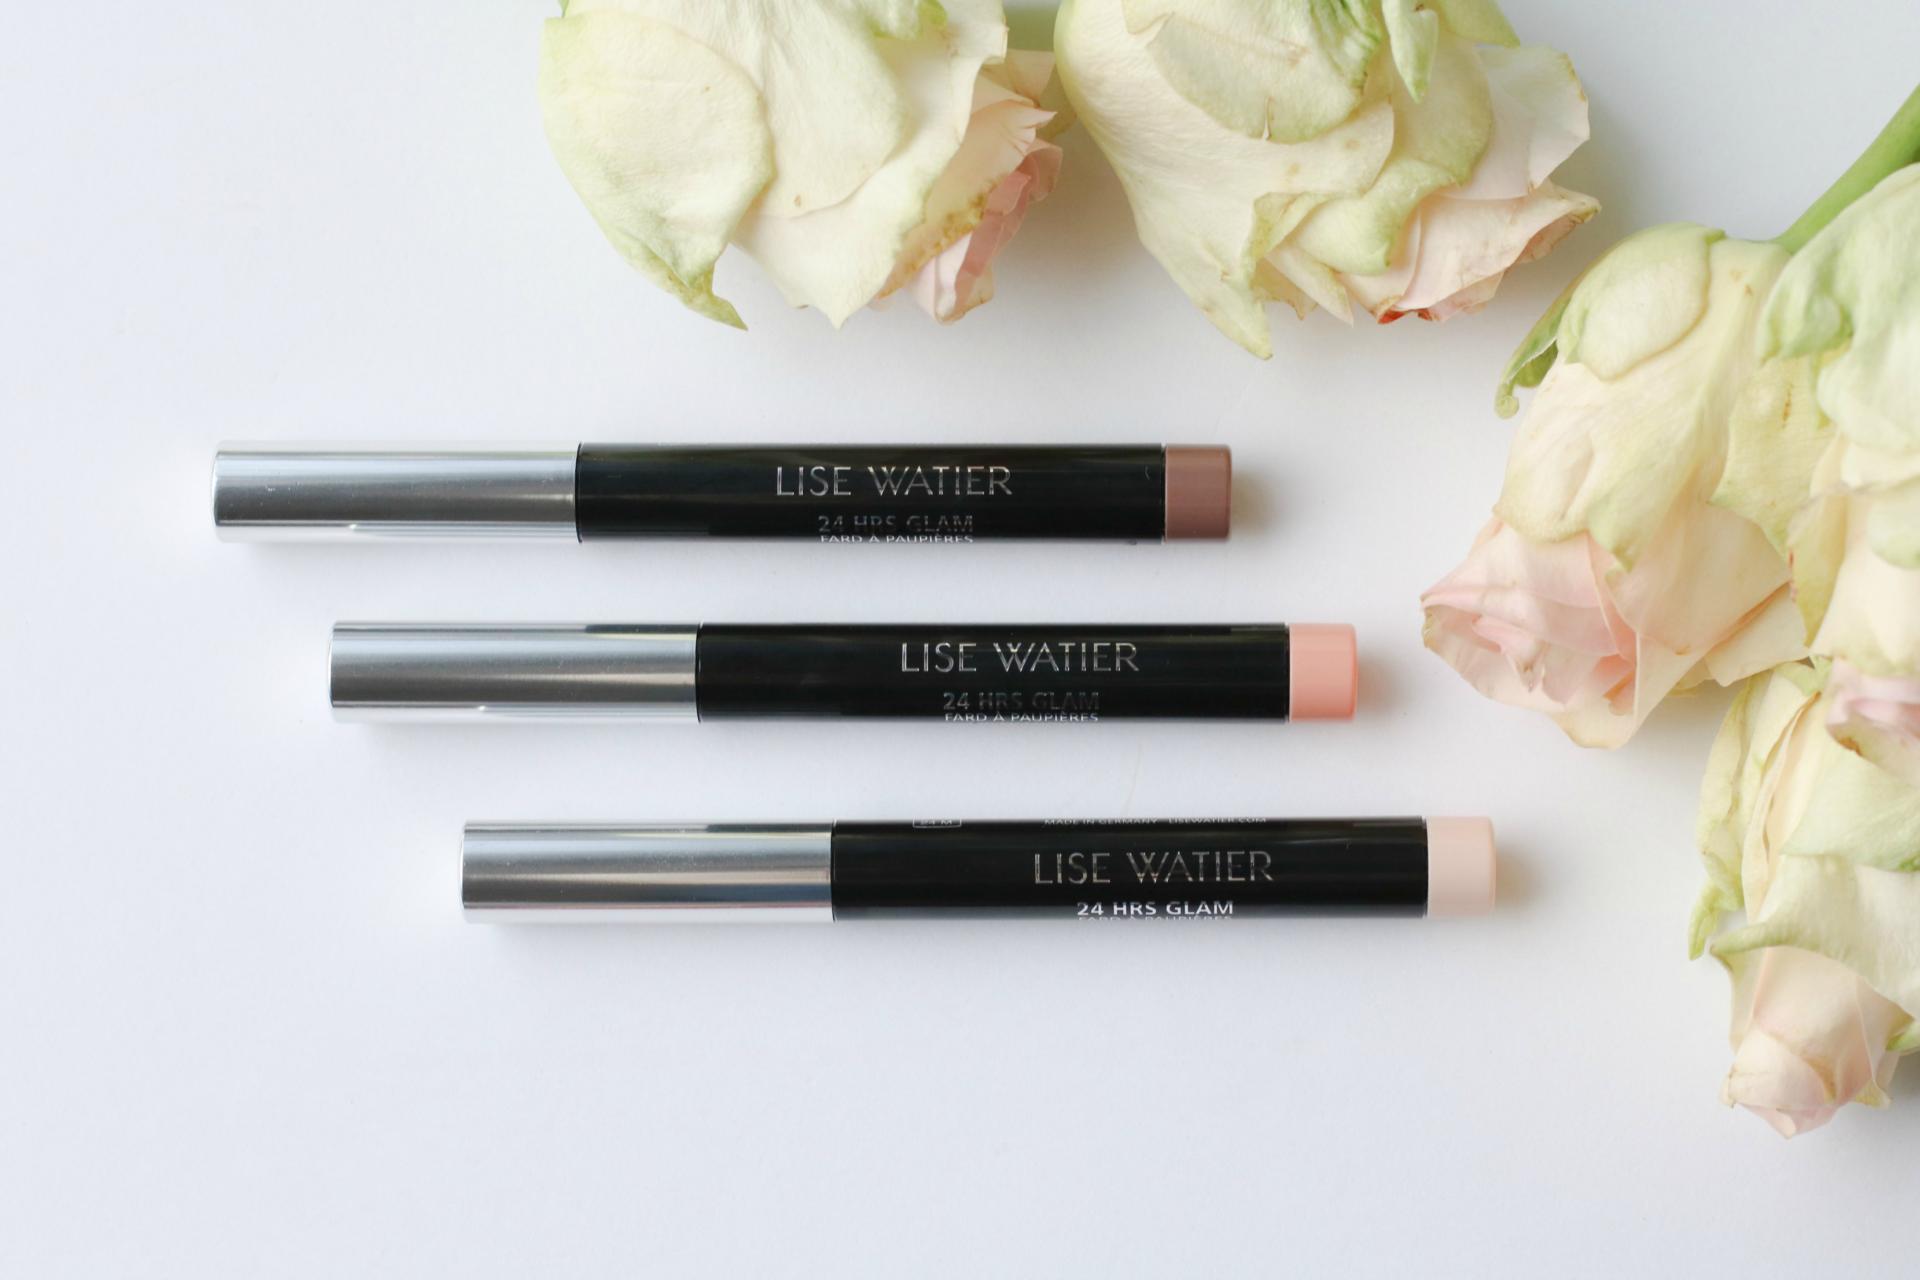 SD Beauty Review: Lise Watier's Spring 2017 Collections - Rouge Intense Suprême and Blossom Beauty